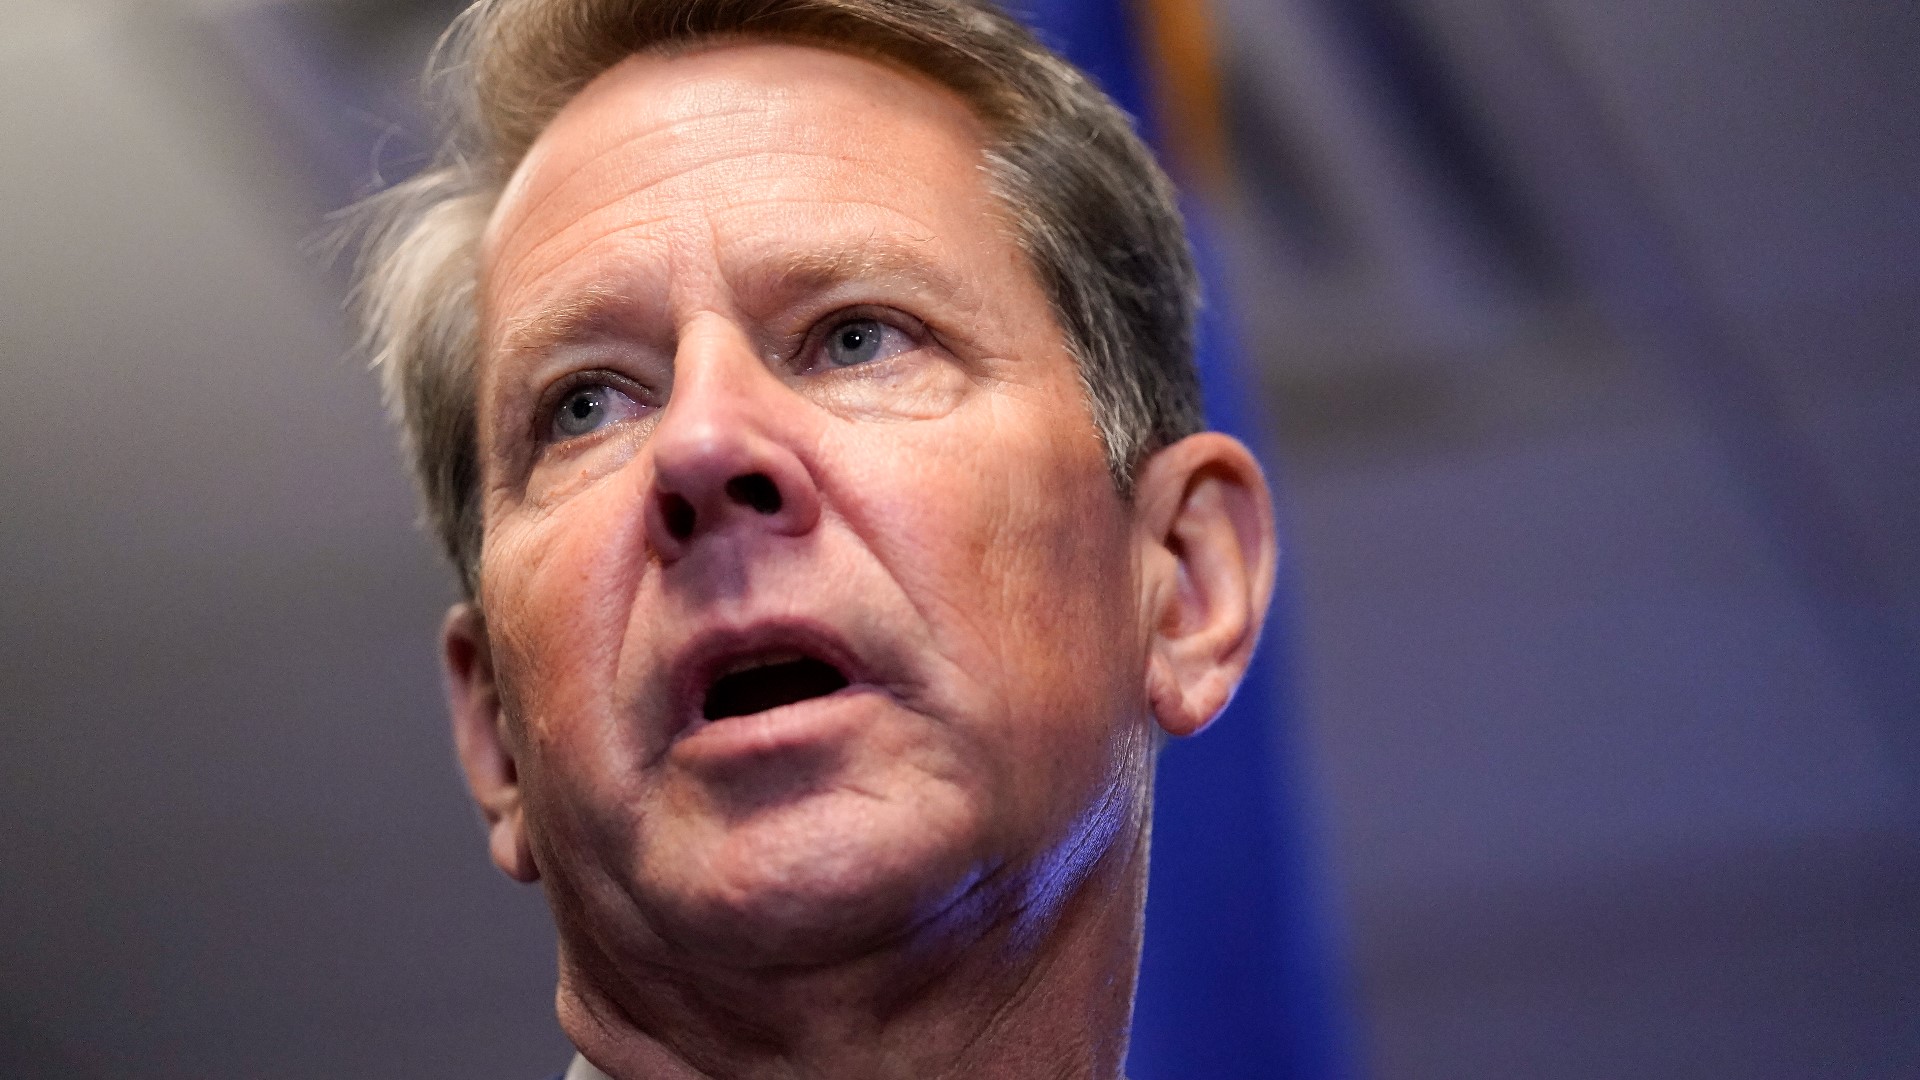 Gov. Brian Kemp wants to implement a Medicaid expansion plan with a work requirement, which needs federal approval.